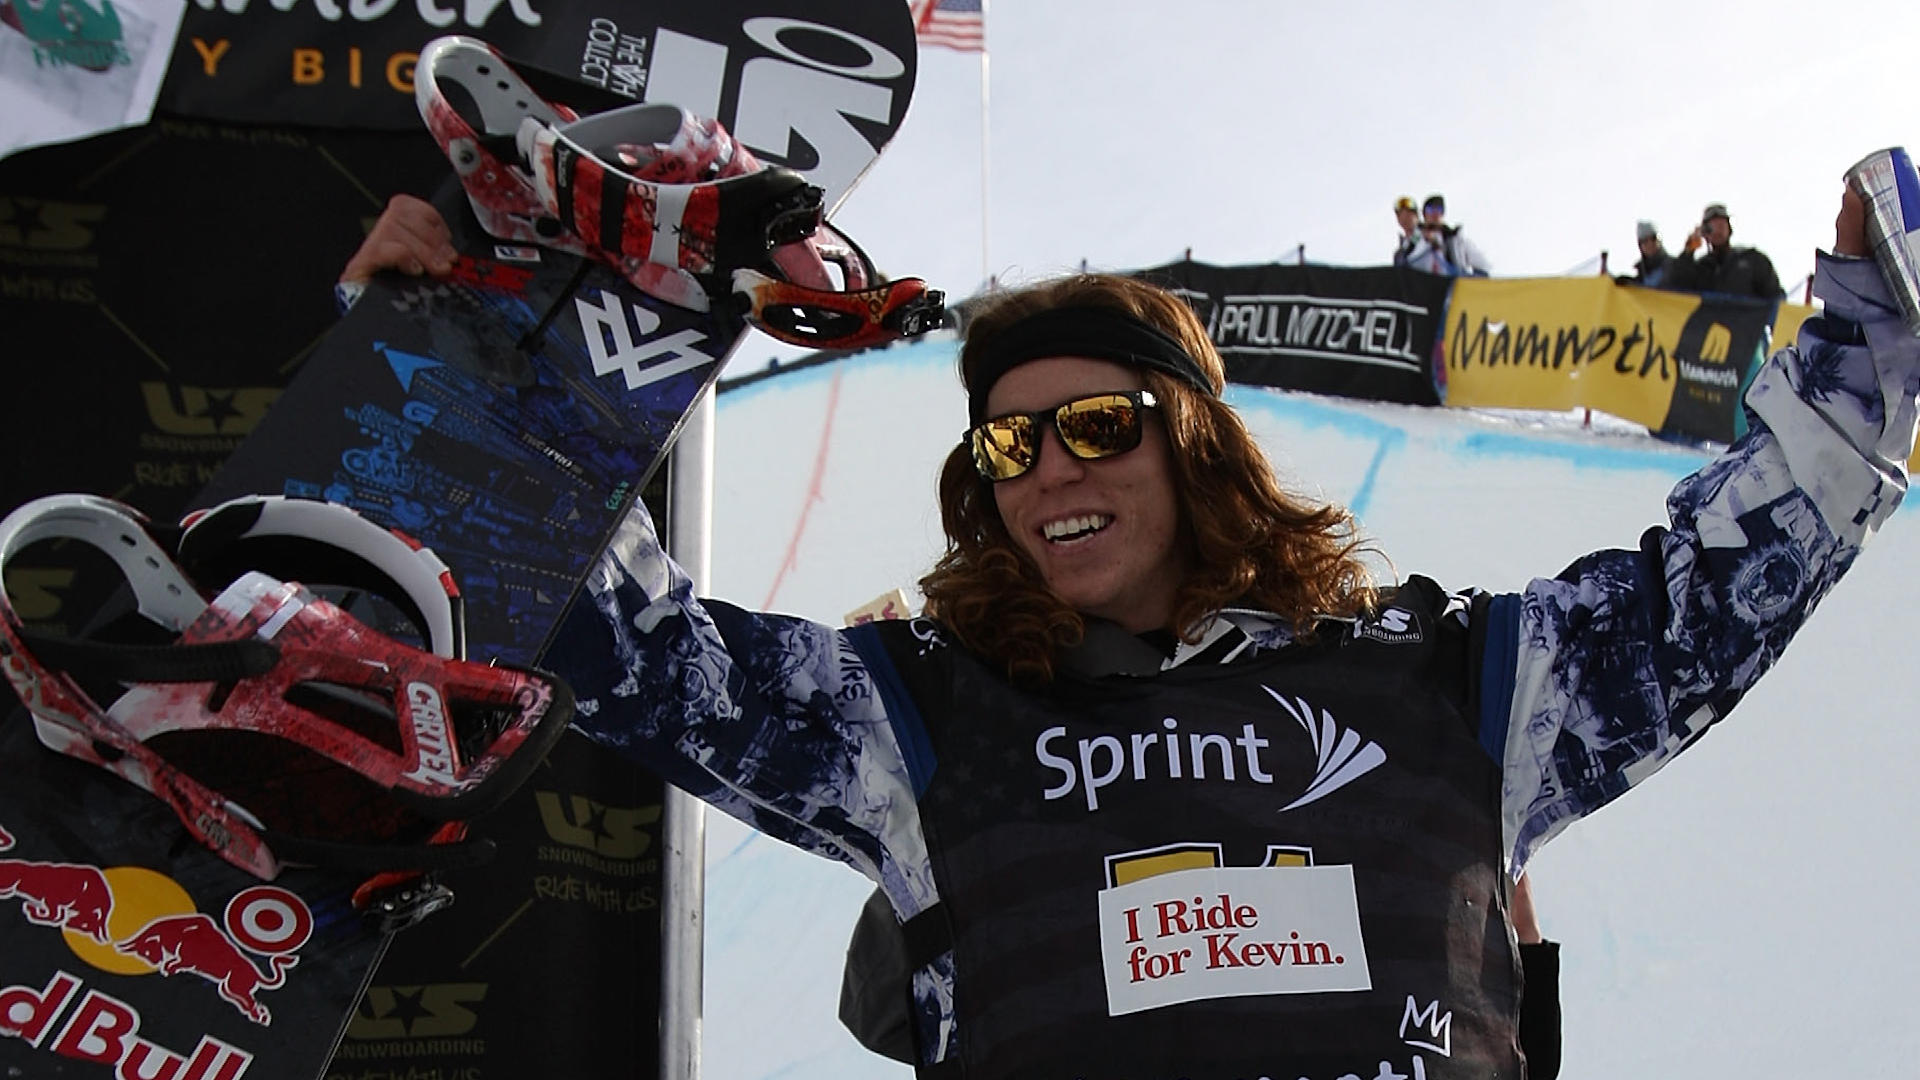 Shaun White: most asked questions about the US snowboard legend